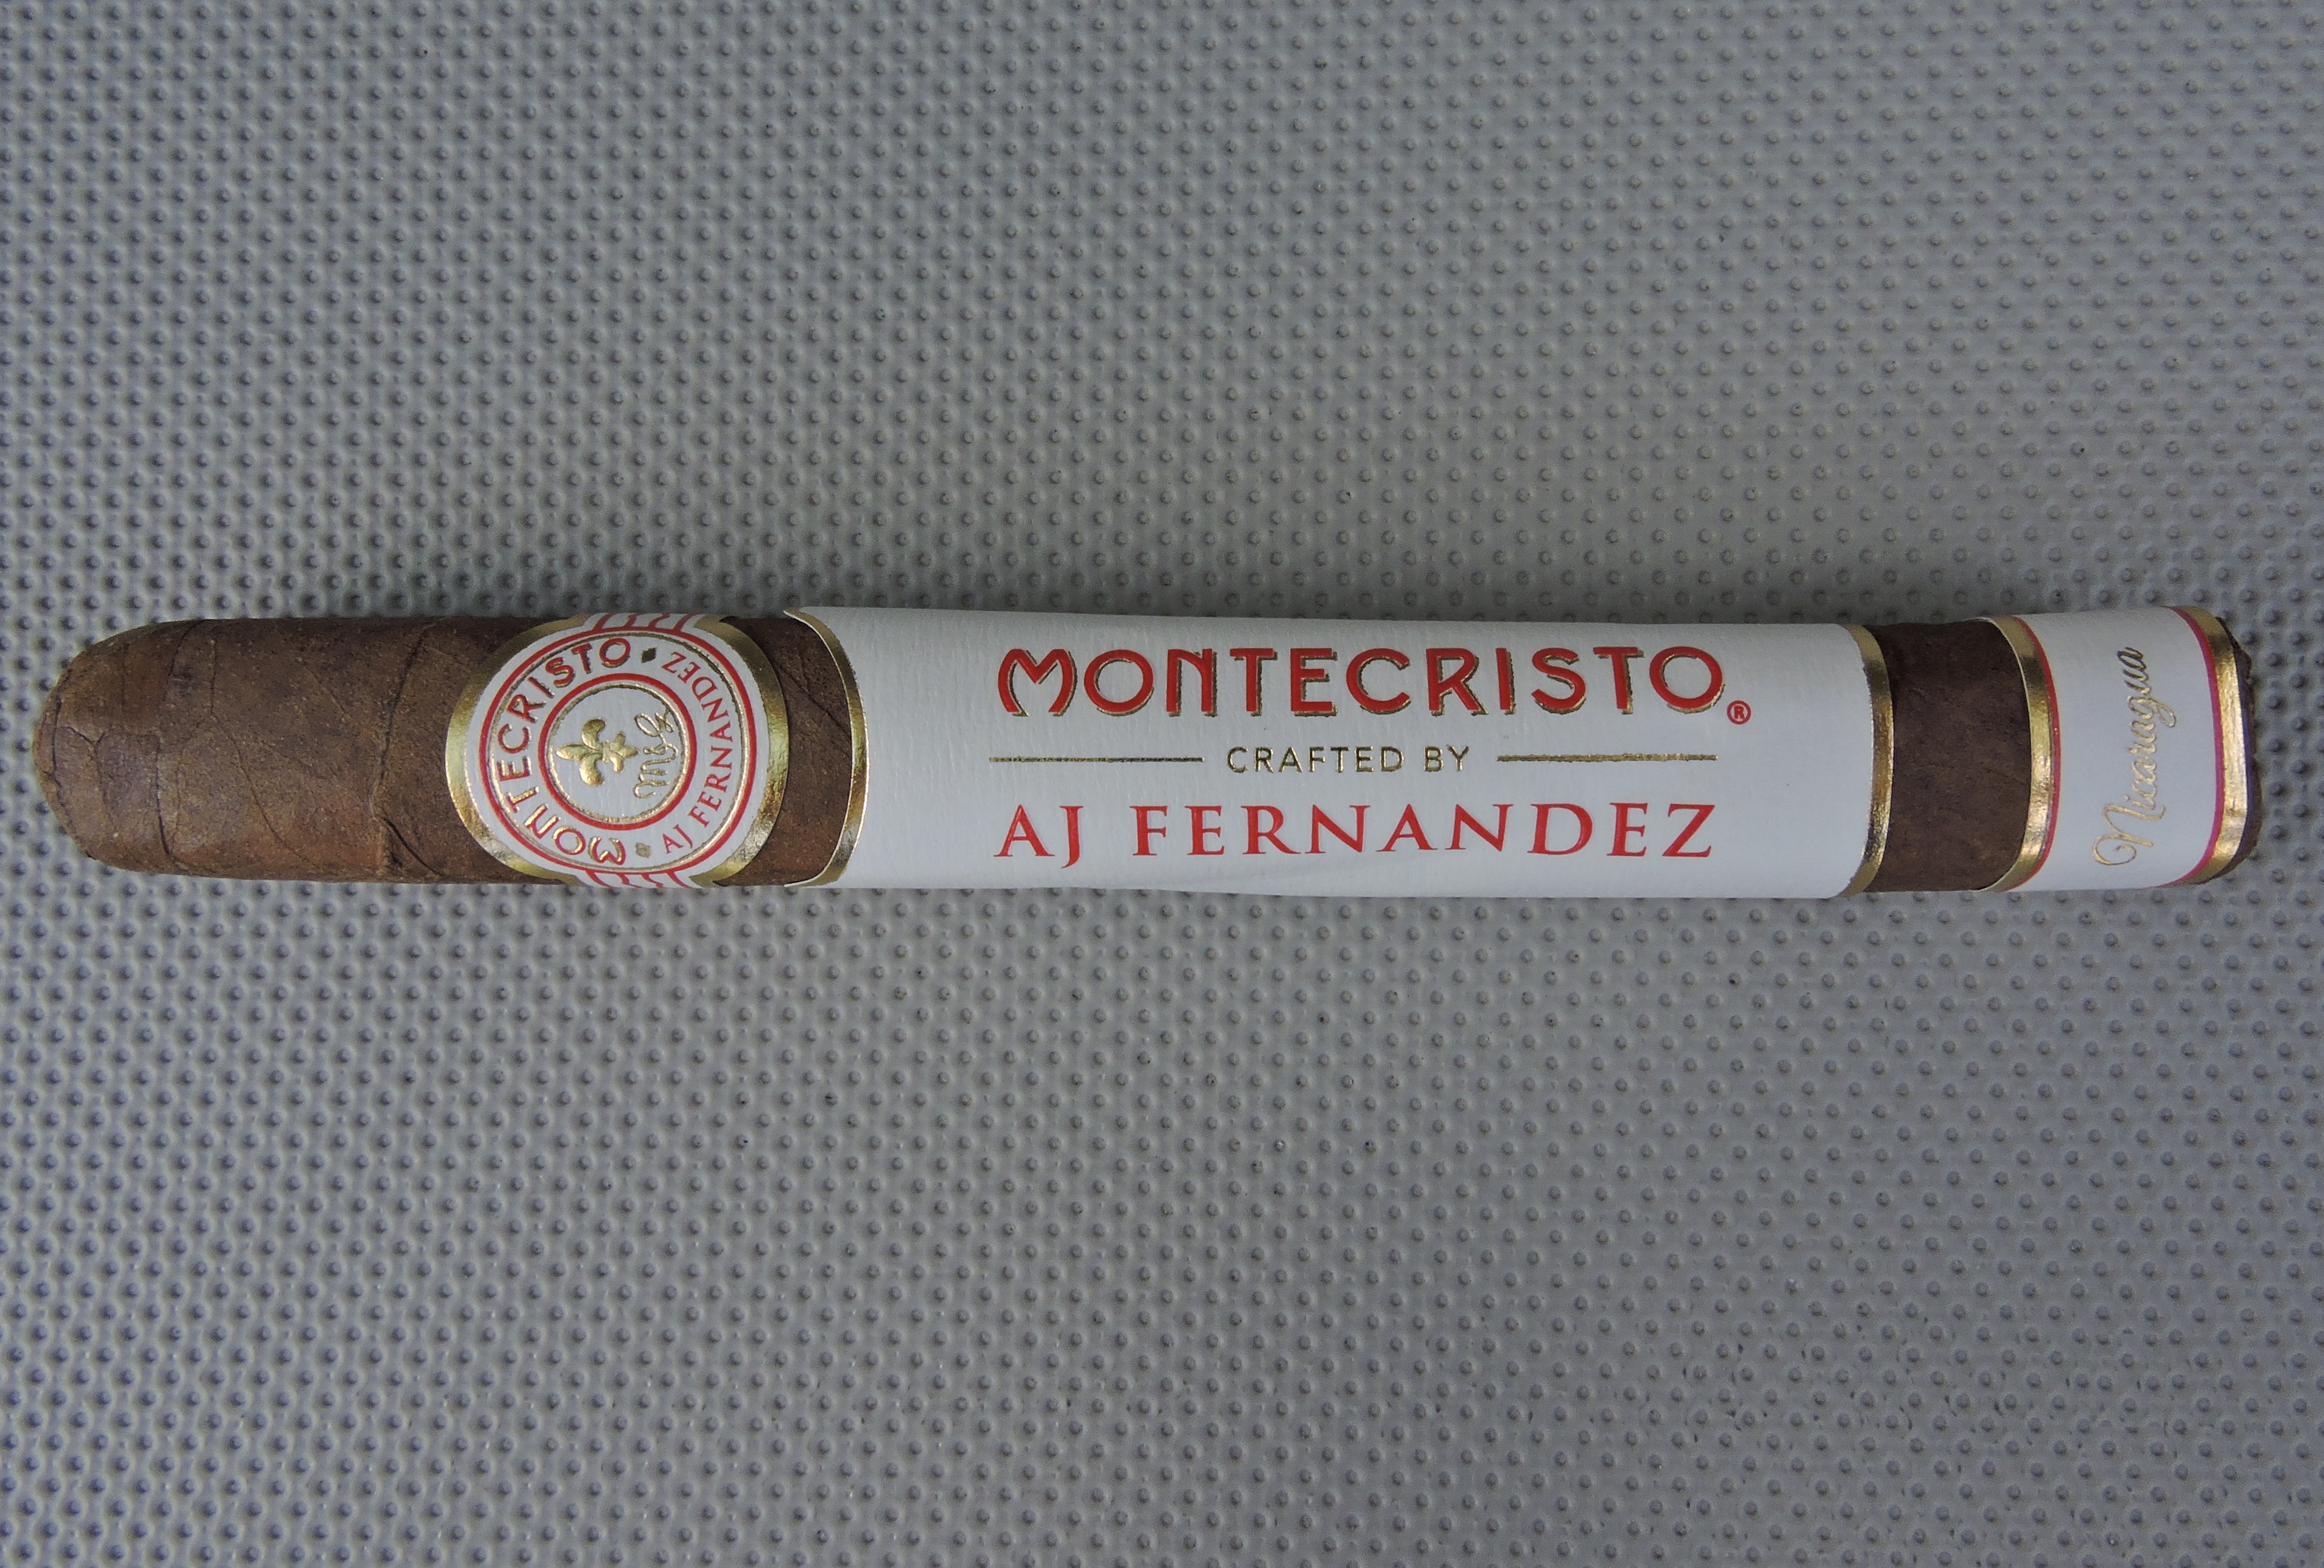 Montecristo Crafted by A.J. Fernandez Toro